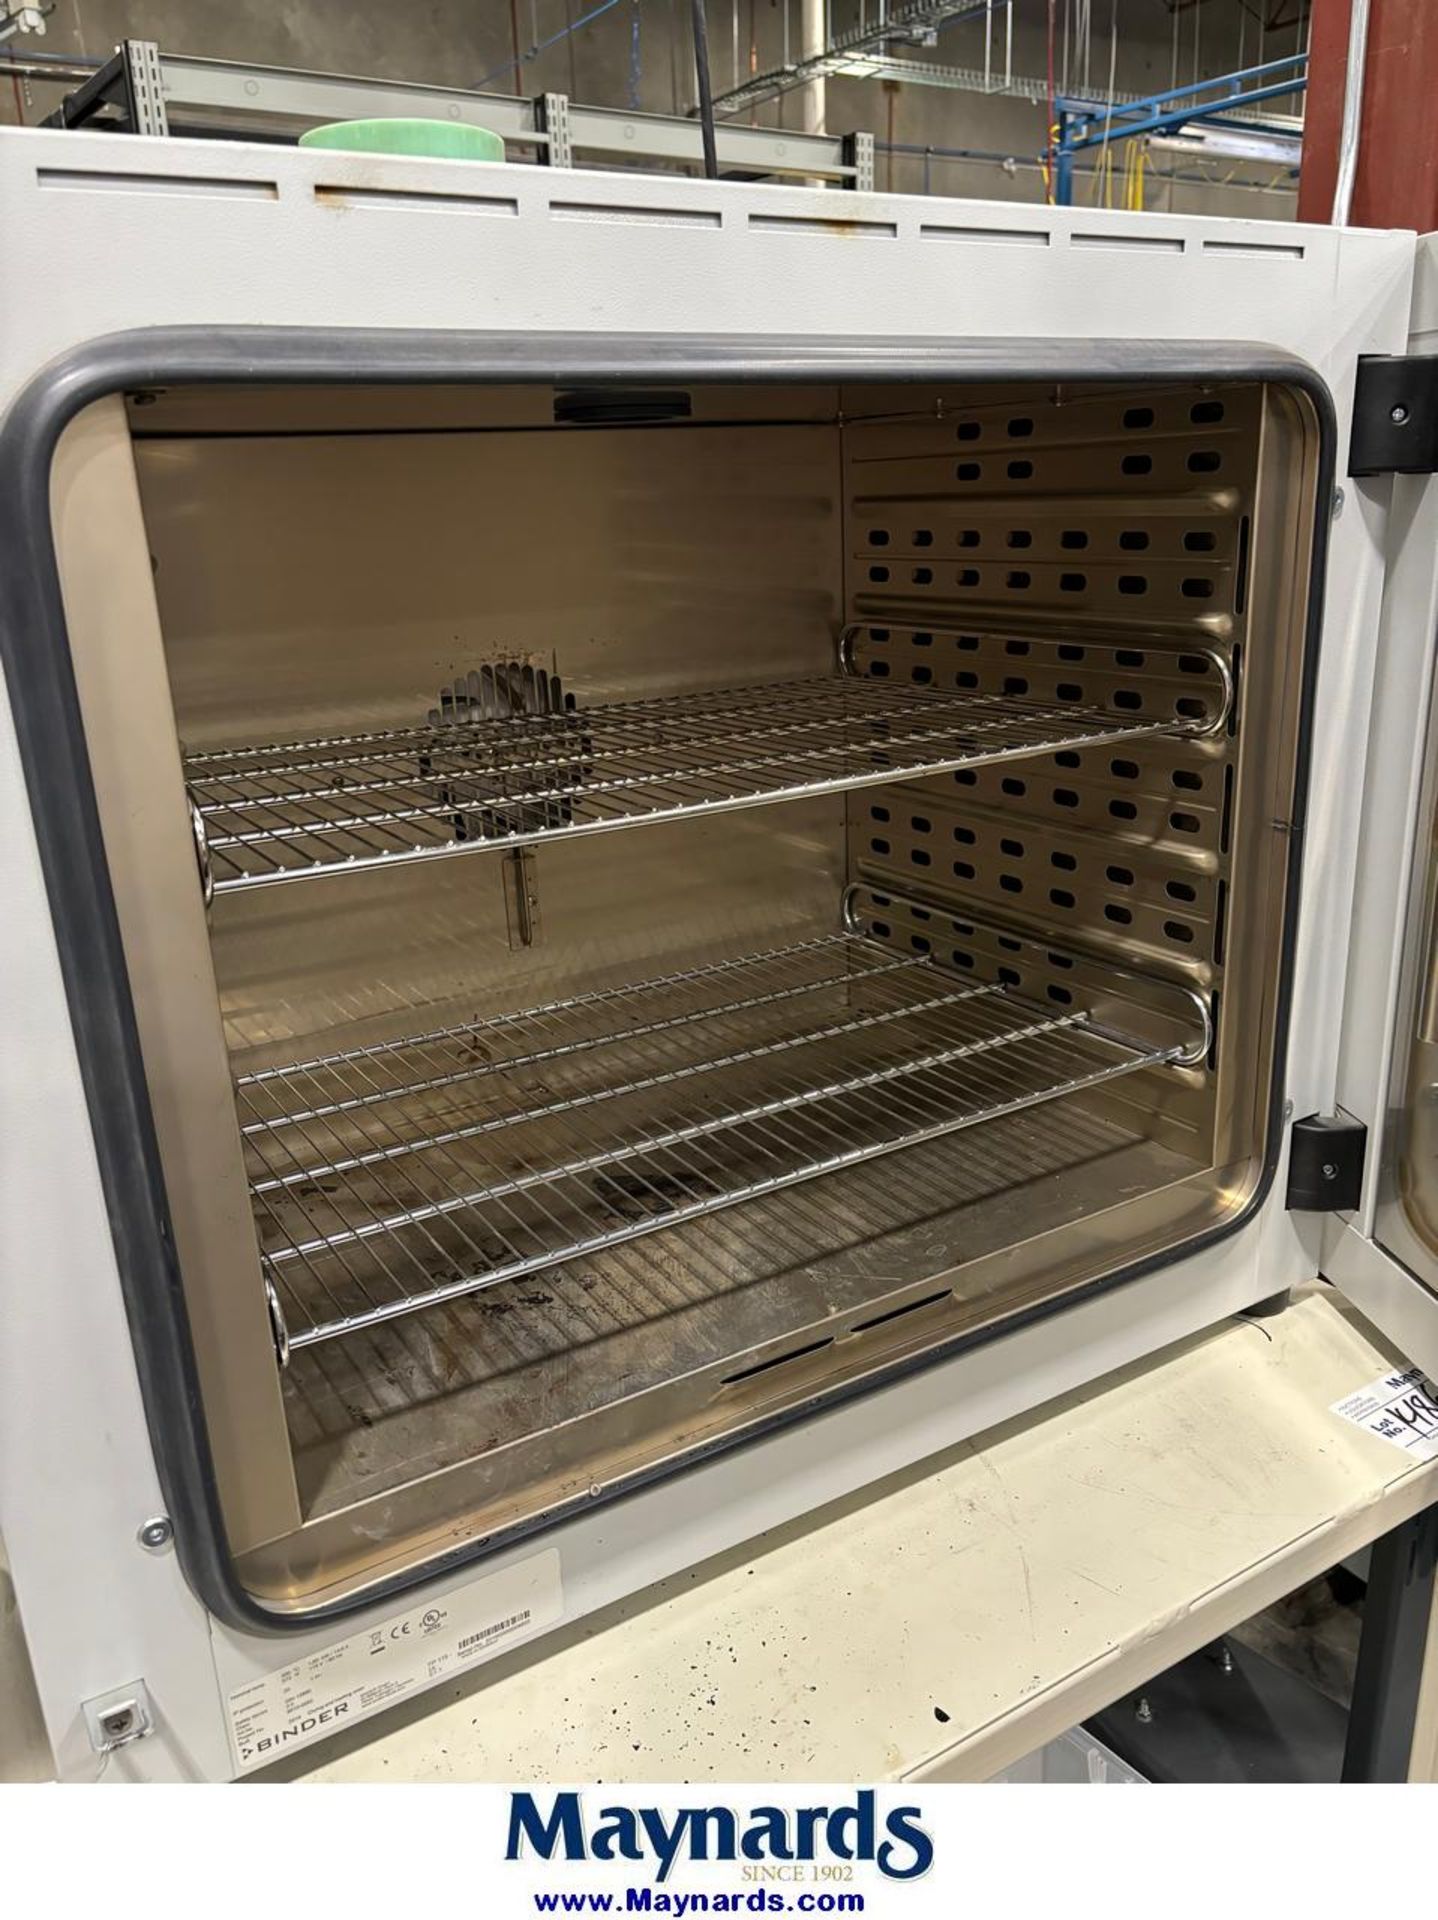 2019 Binder 9010-0262 drying and heating oven with stand - Image 3 of 4